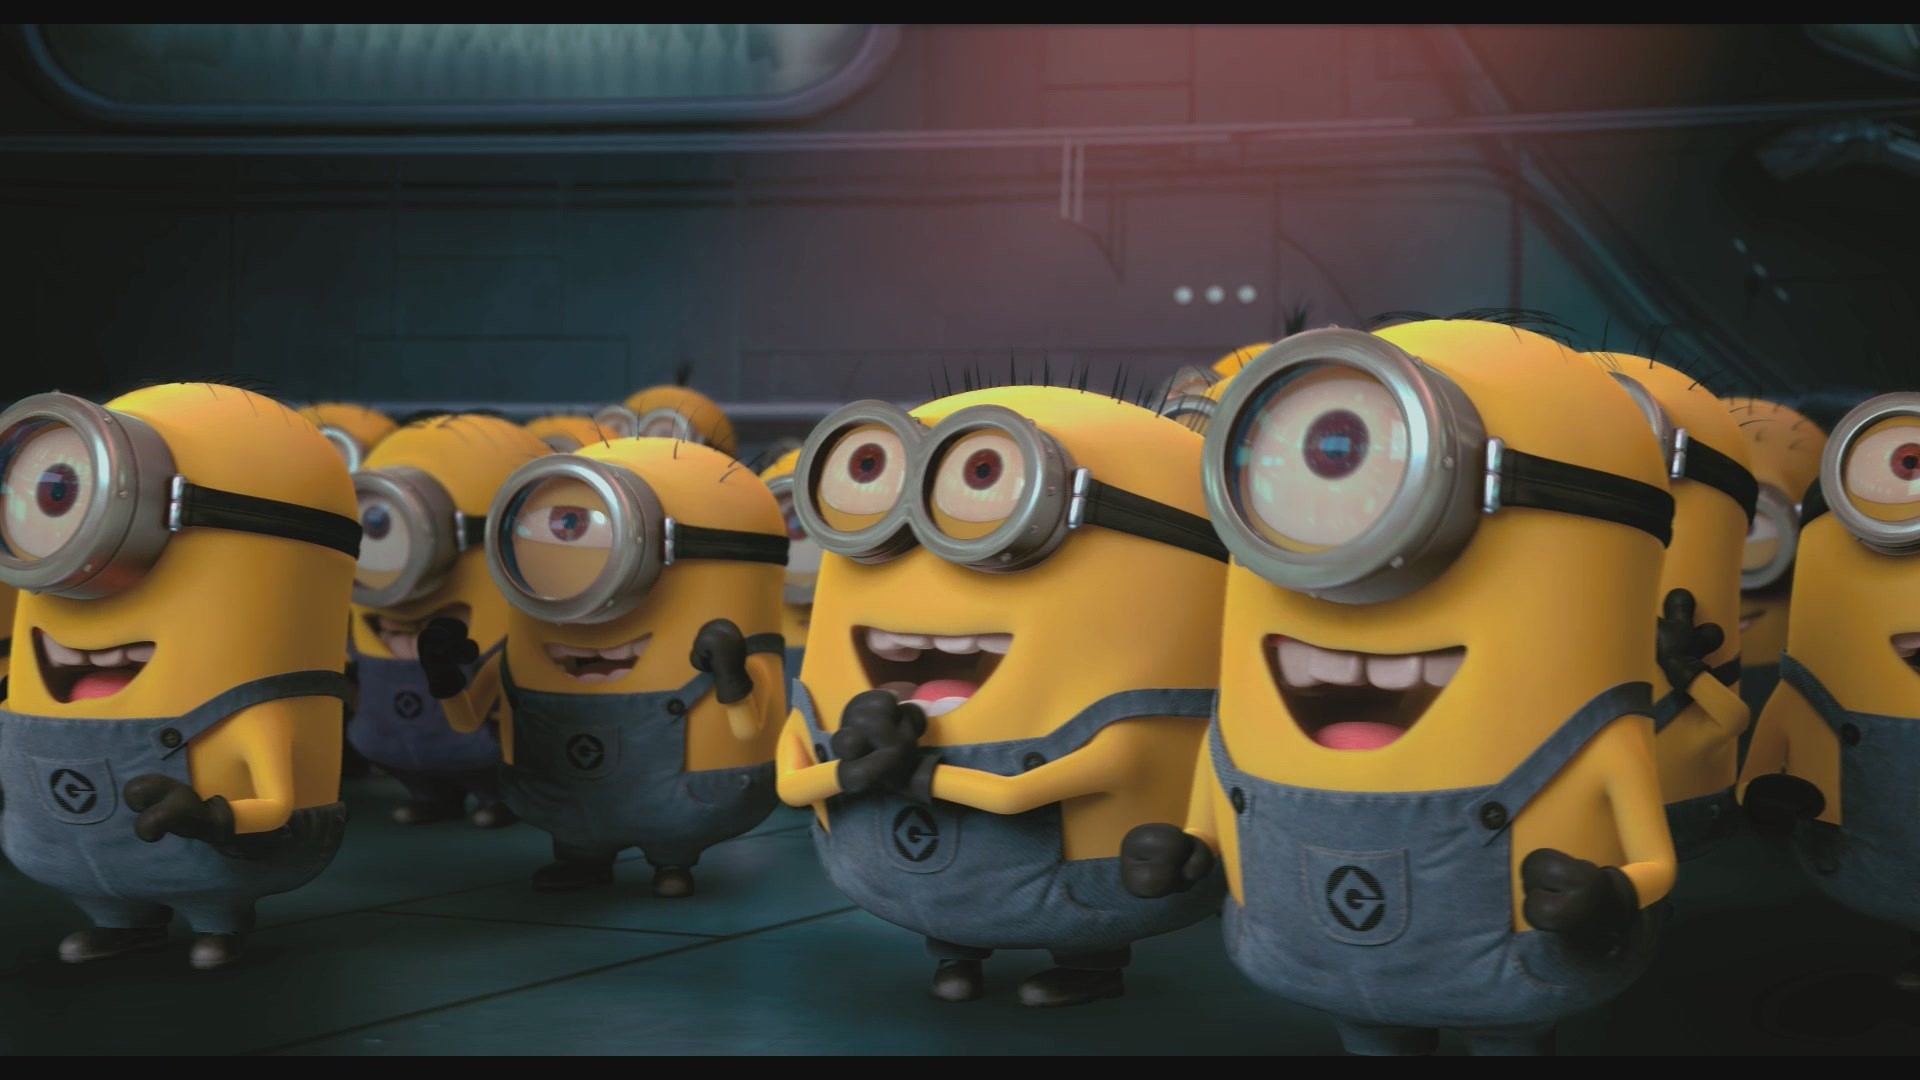 Wallpaper, yellow, Toy, animated movies, machine, minions, Despicable Me, screenshot 1920x1080